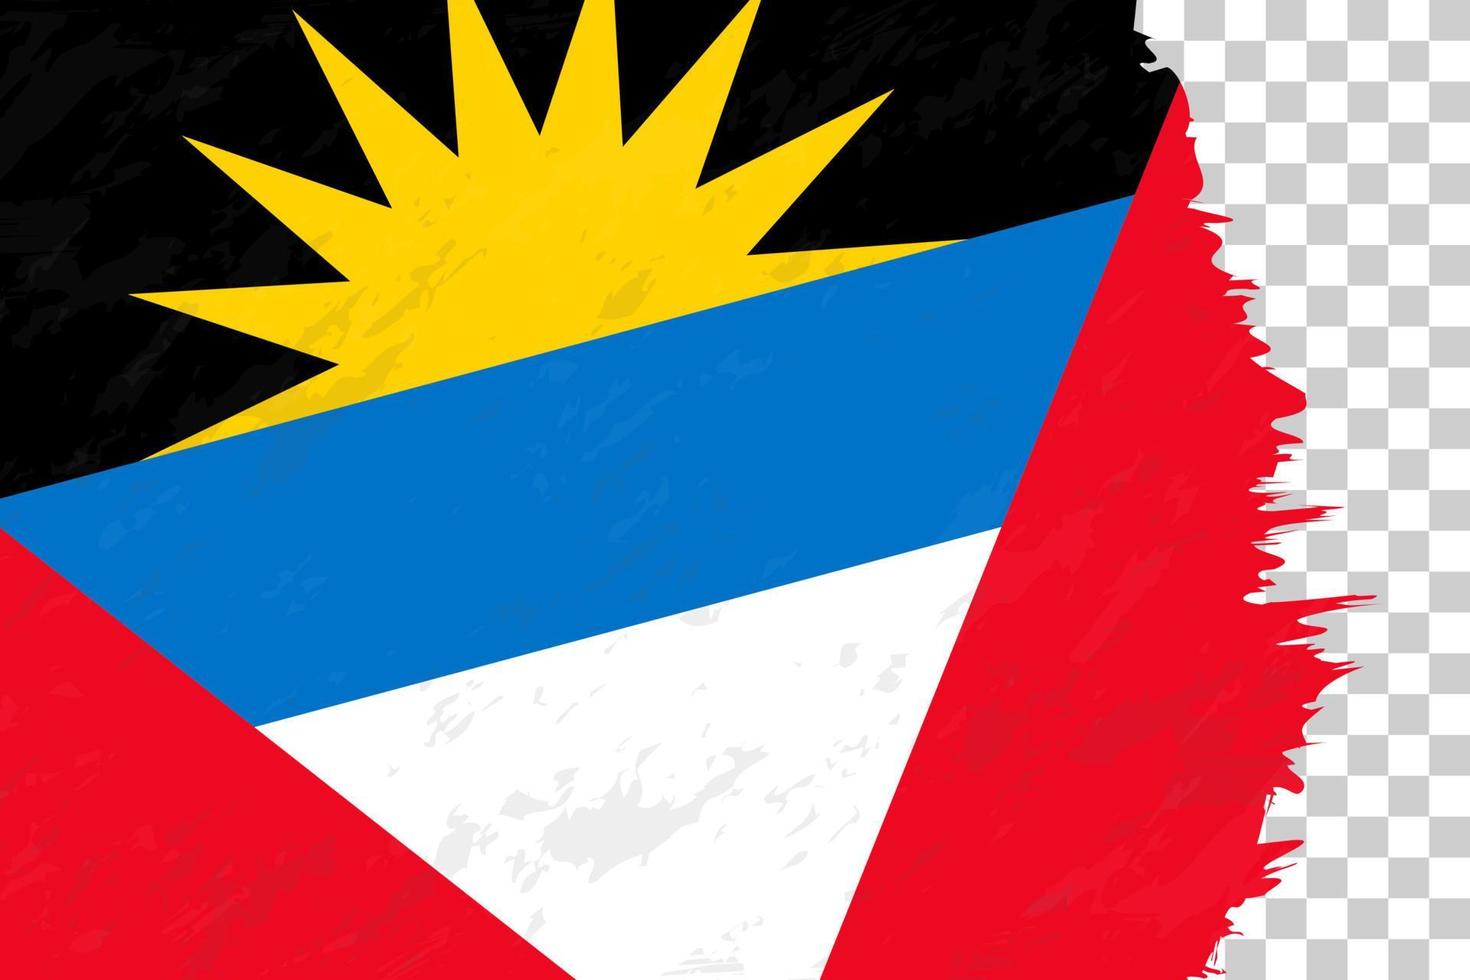 Horizontal Abstract Grunge Brushed Flag of Antigua and Barbuda on Transparent Grid. vector